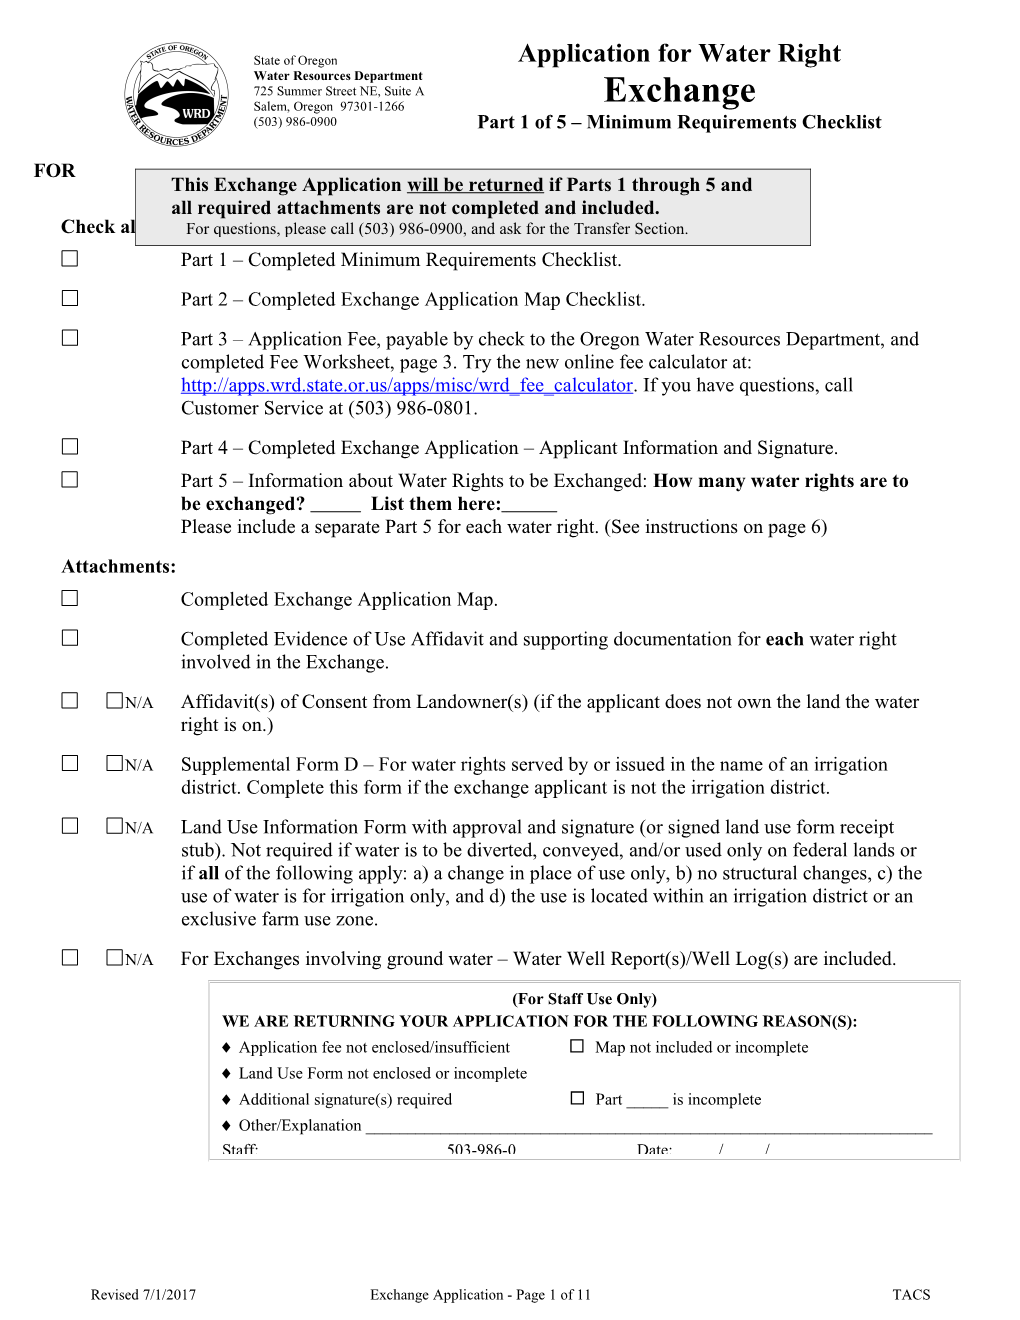 OWRD Application for Water Right Transfer